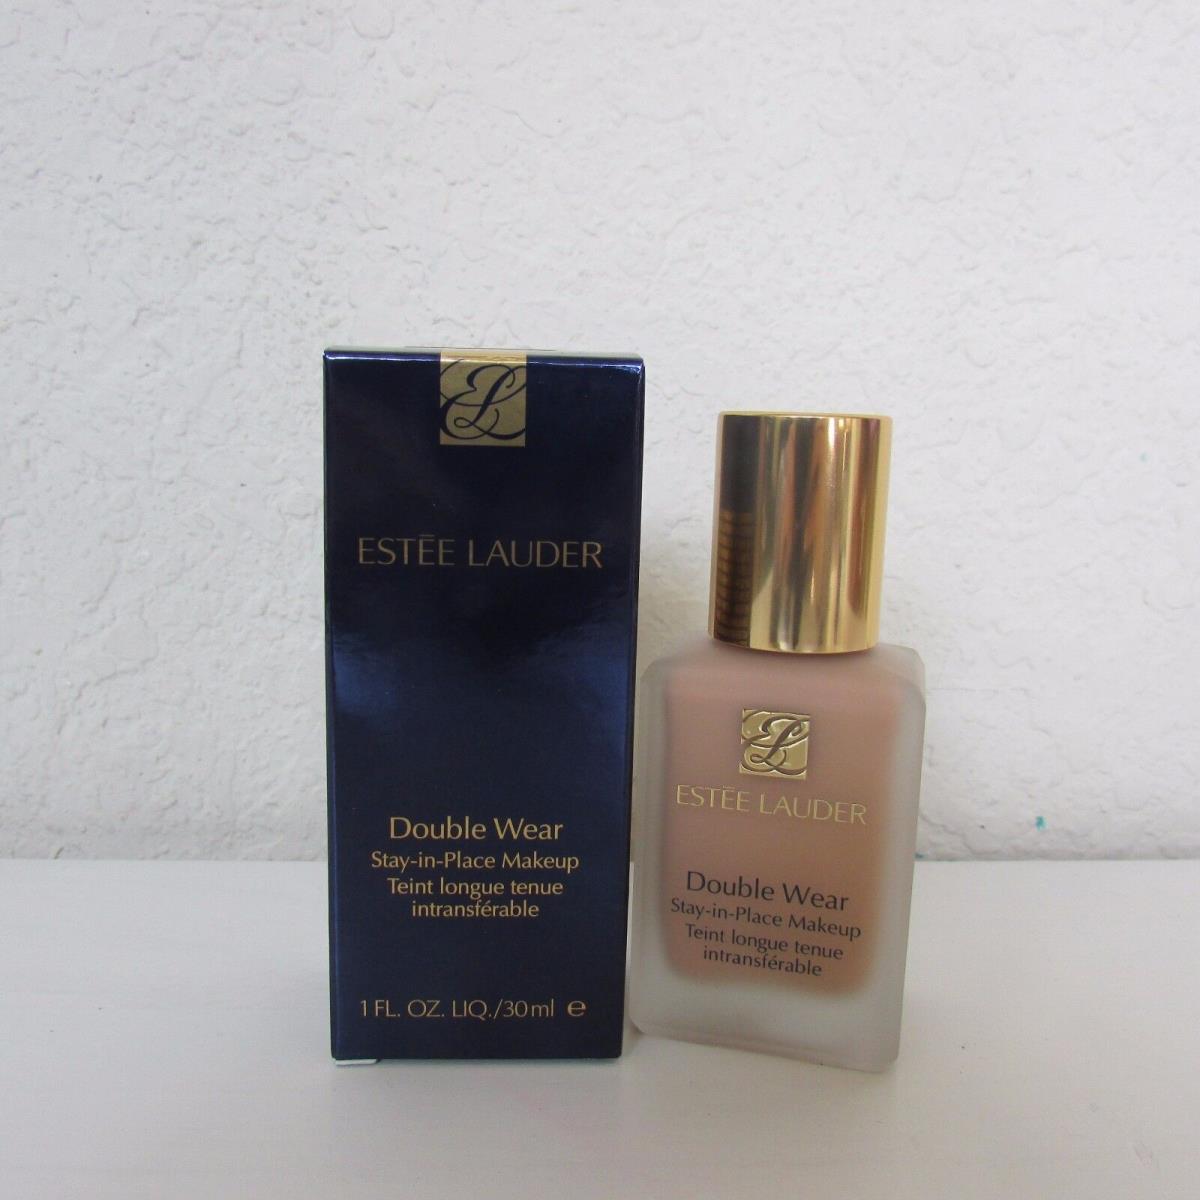 Estee Lauder Double Wear Stay-in-place Makeup Choose Your Shade 1.0 Oz/30 ml 3C2 Pebble